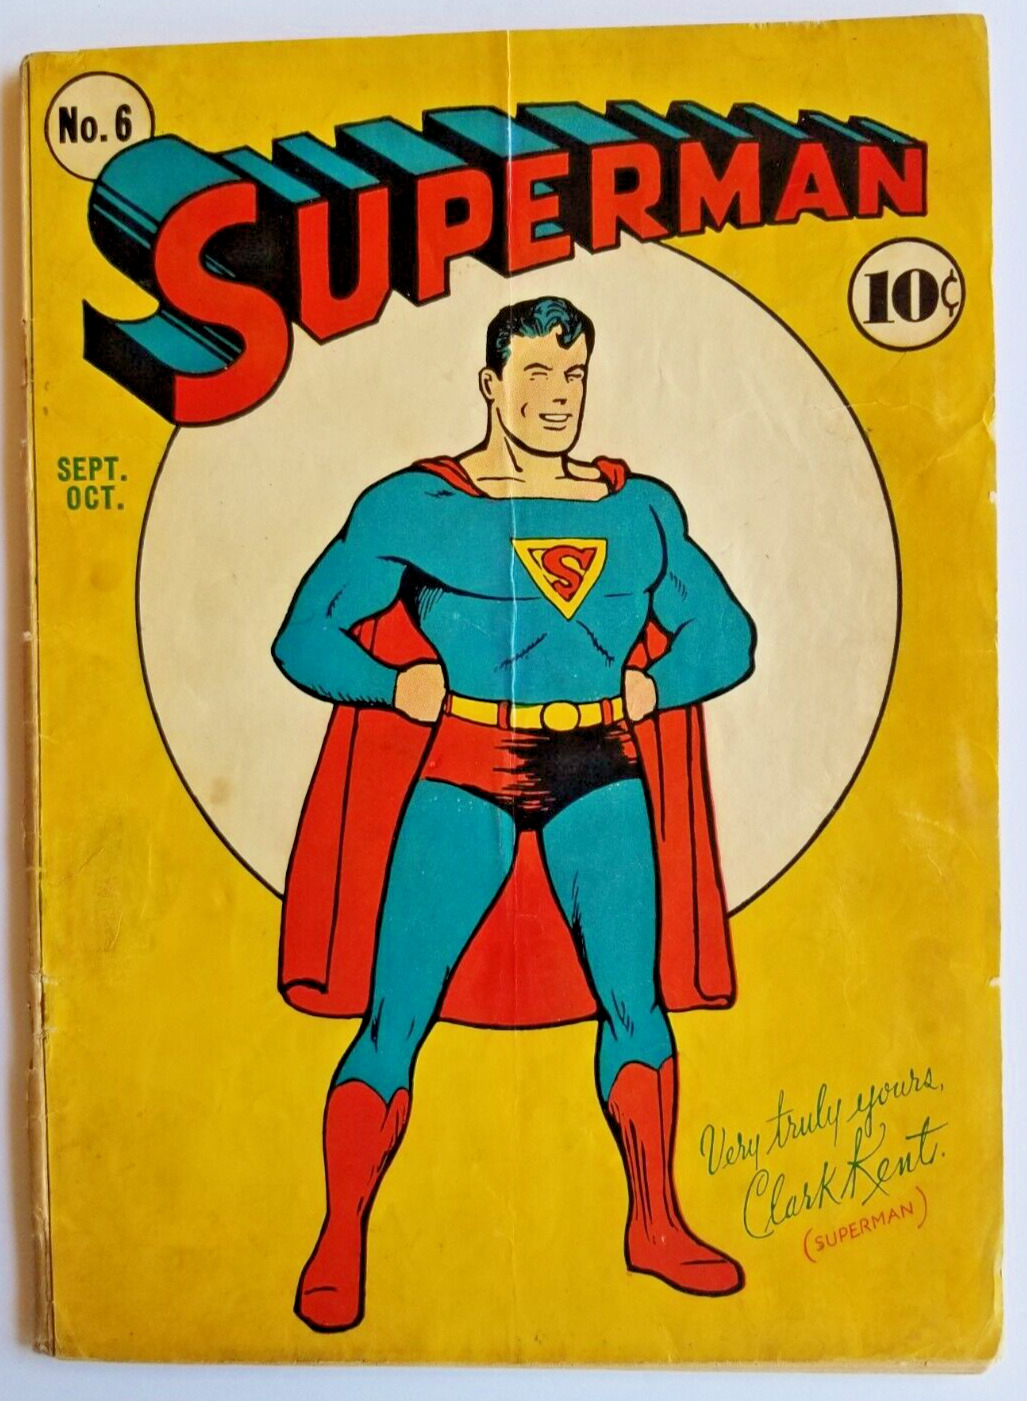 SUPERMAN #6 VG- 3.5 (A) (DC 1940) CLASSIC COVER, ADS FOR ALL STAR #1 & BATMAN #2